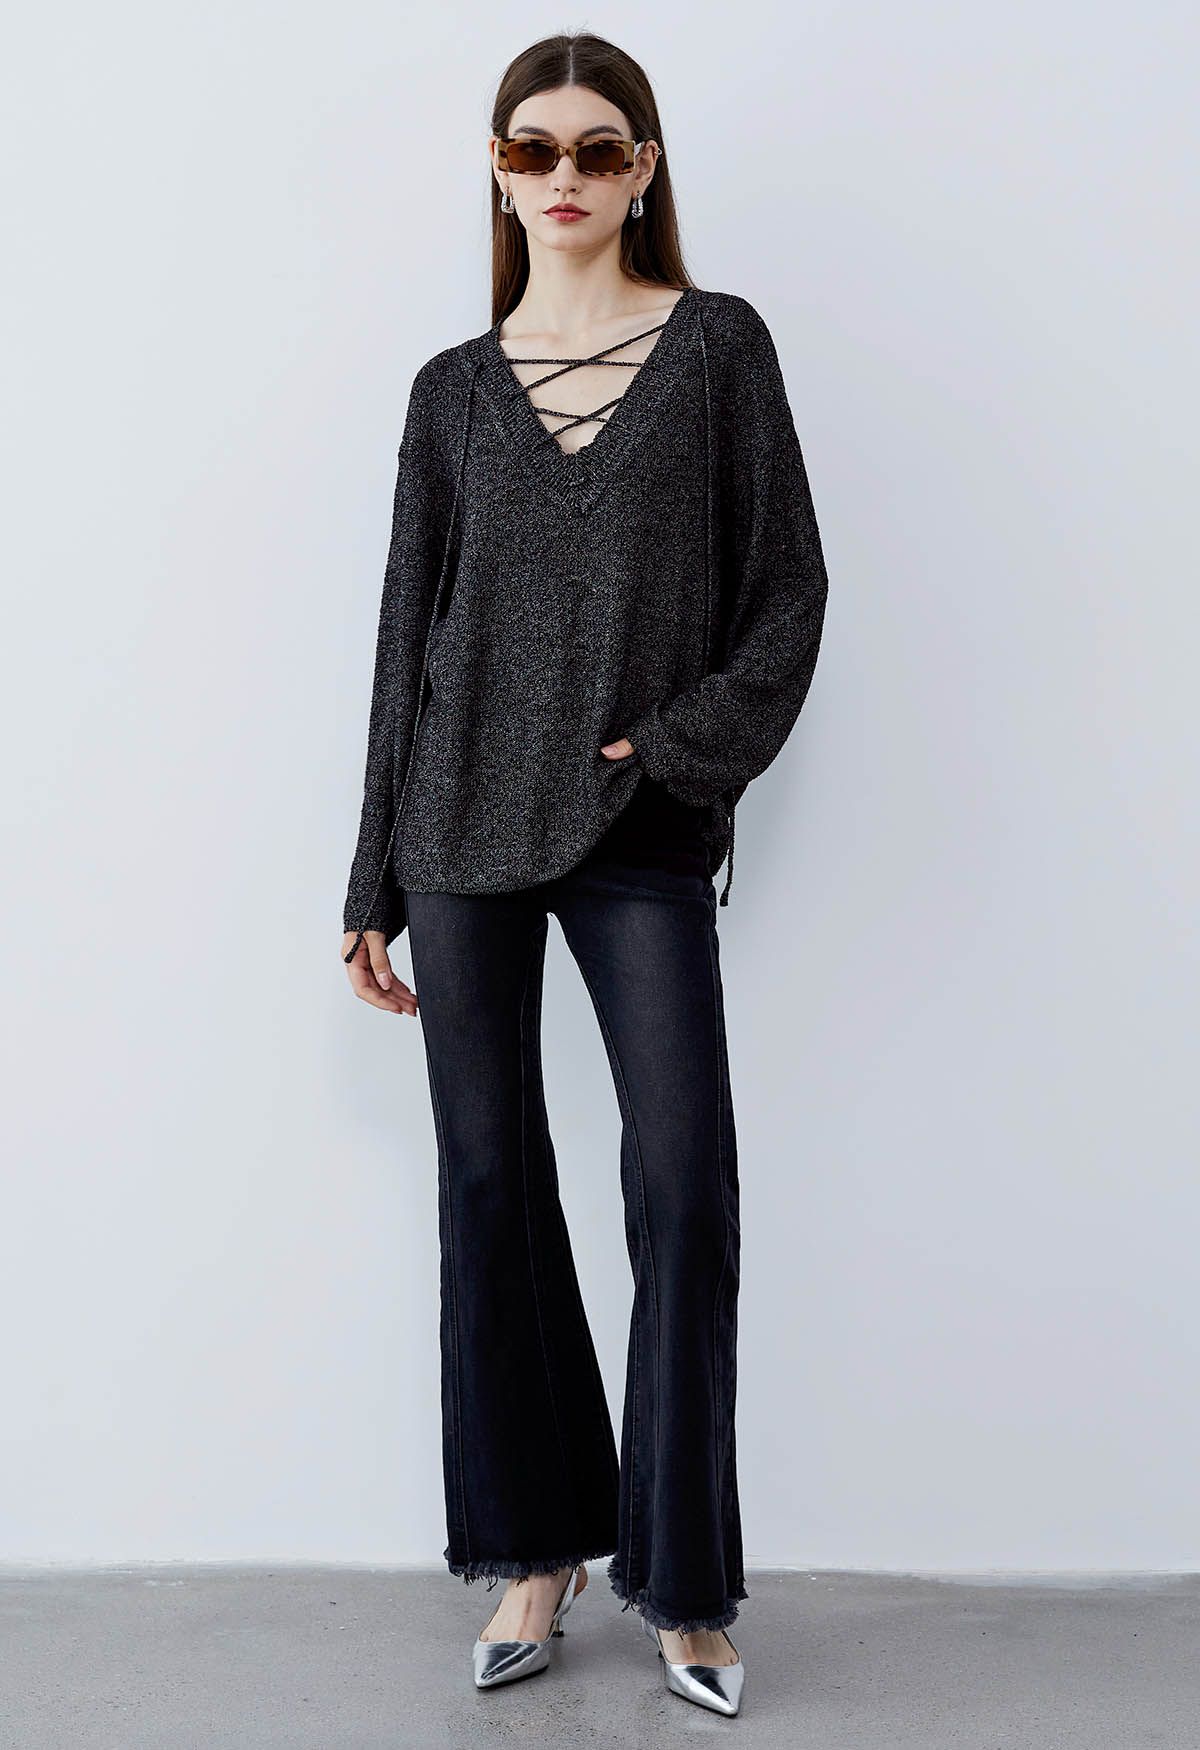 Slouchy V-Neck Lace-Up Knit Sweater in Black